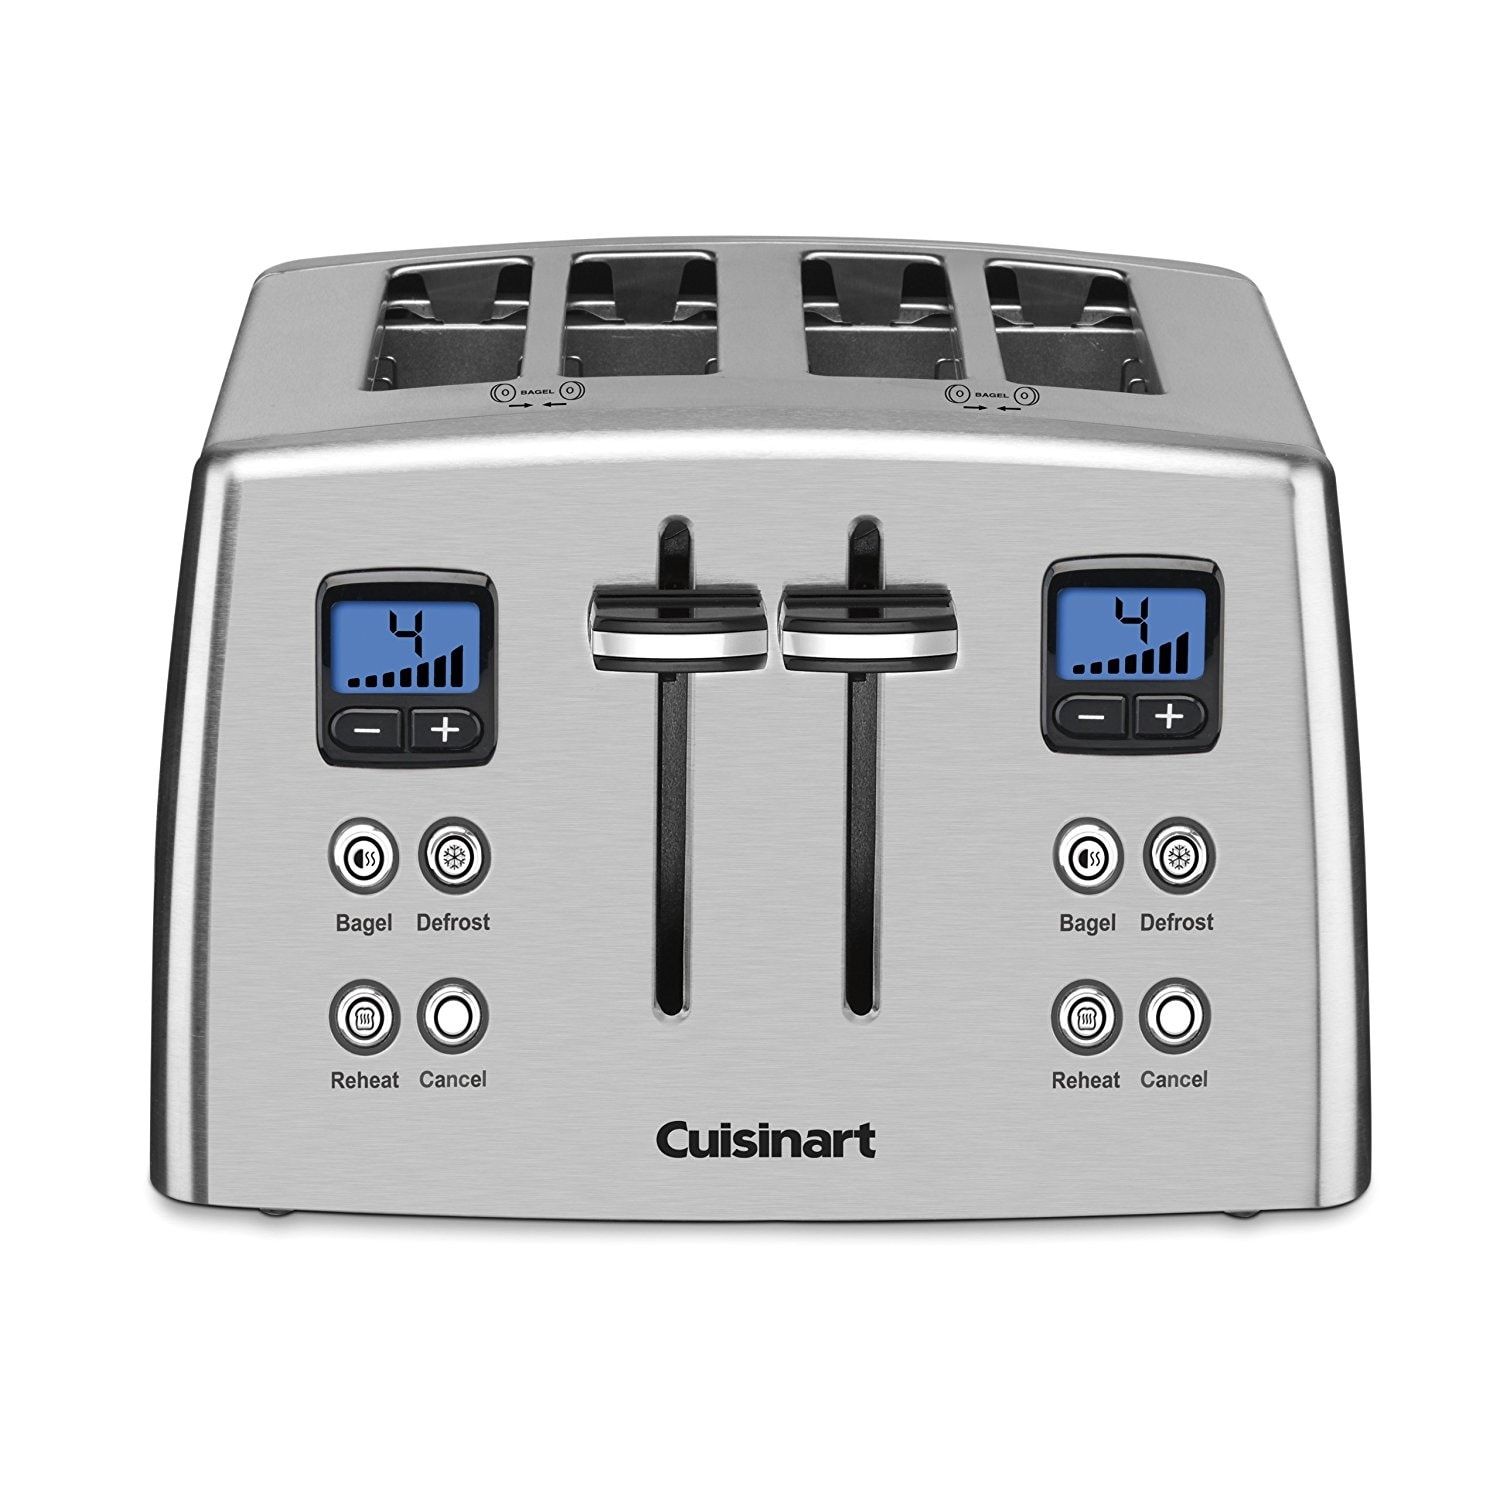 https://ak1.ostkcdn.com/images/products/is/images/direct/0a5aa81b7f16f840357715653e2126263dcc9f74/Cuisinart-CPT-435-Countdown-4-Slice-Toaster%2C-Stainless-Steel.jpg